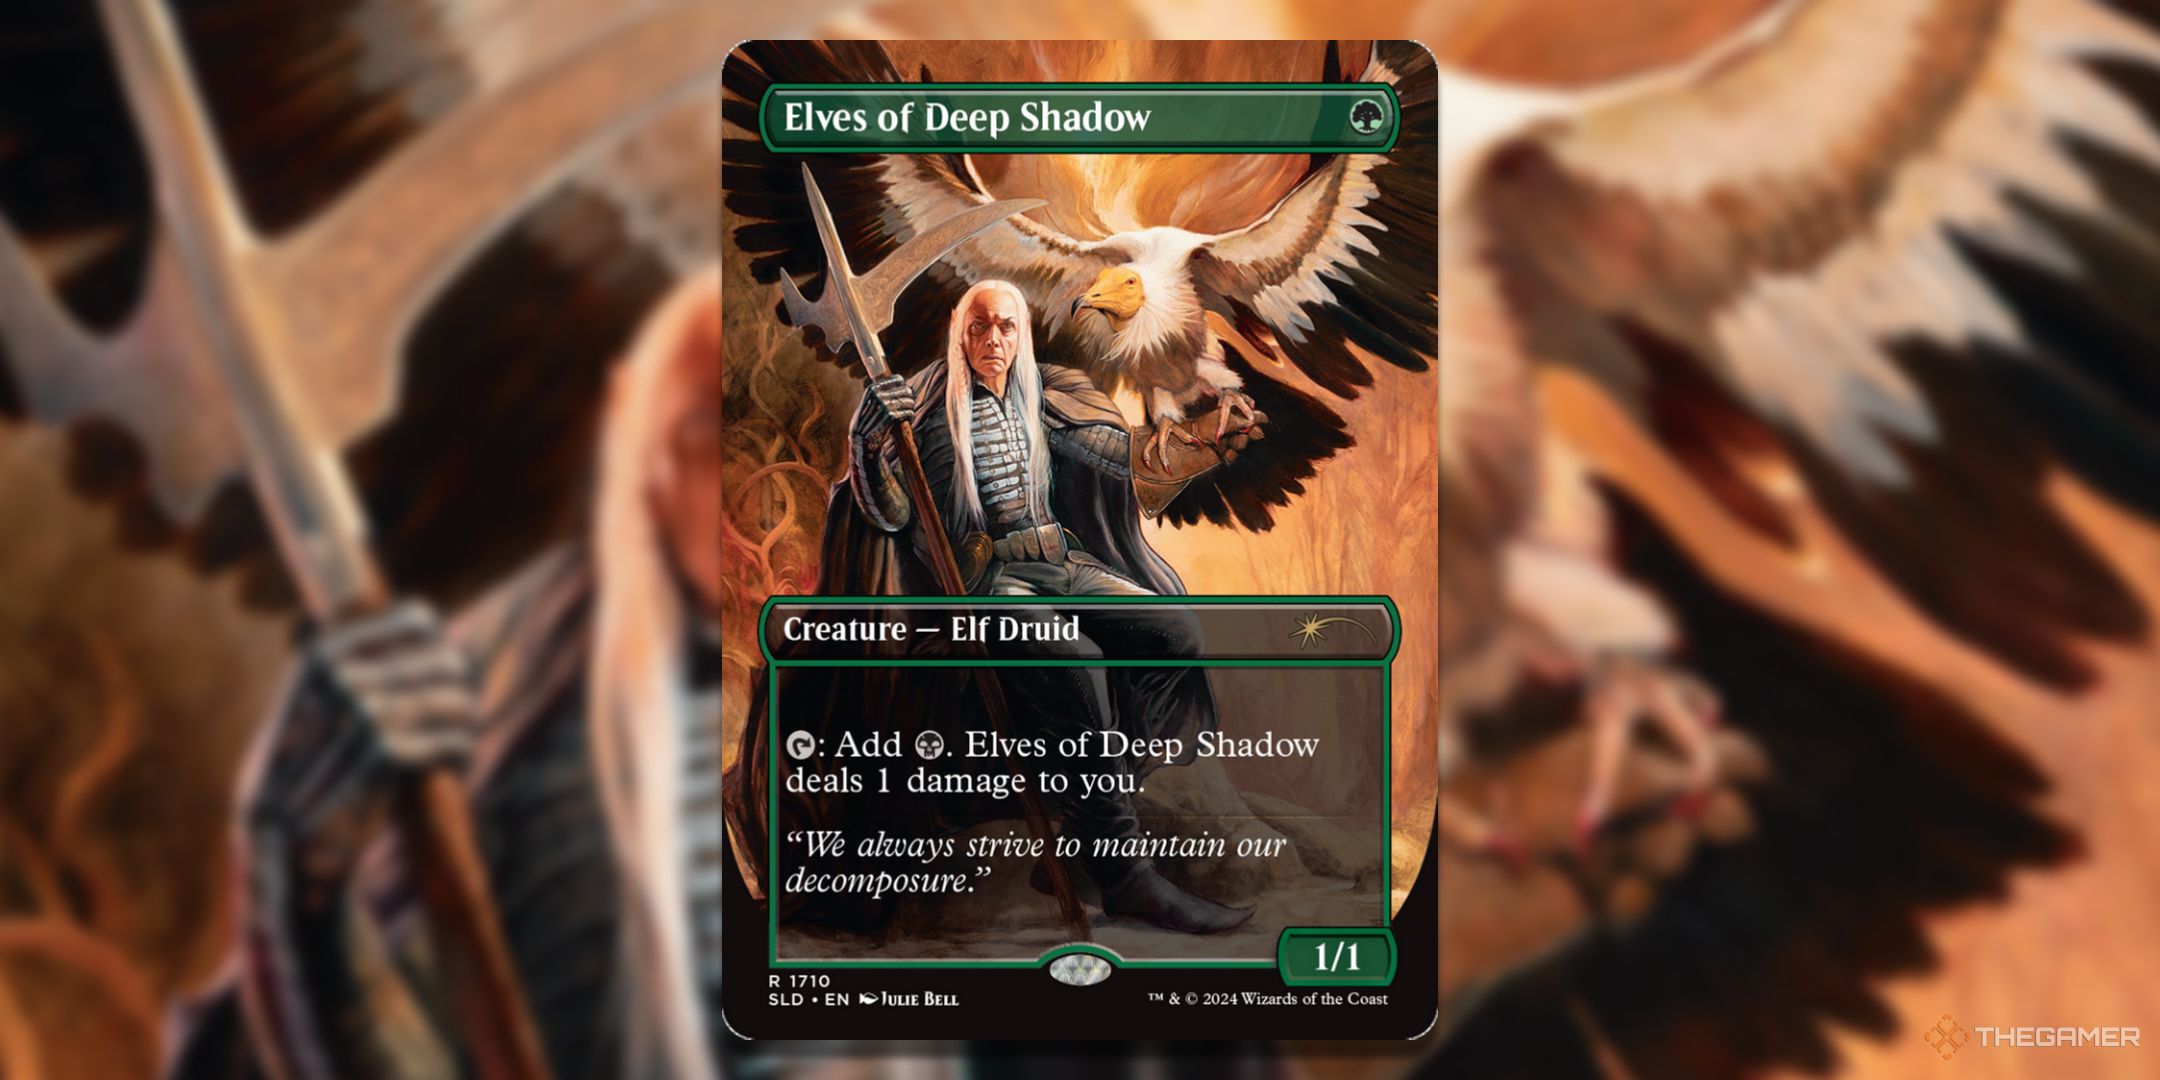 MTG Elves of Deep Shadow card and art background